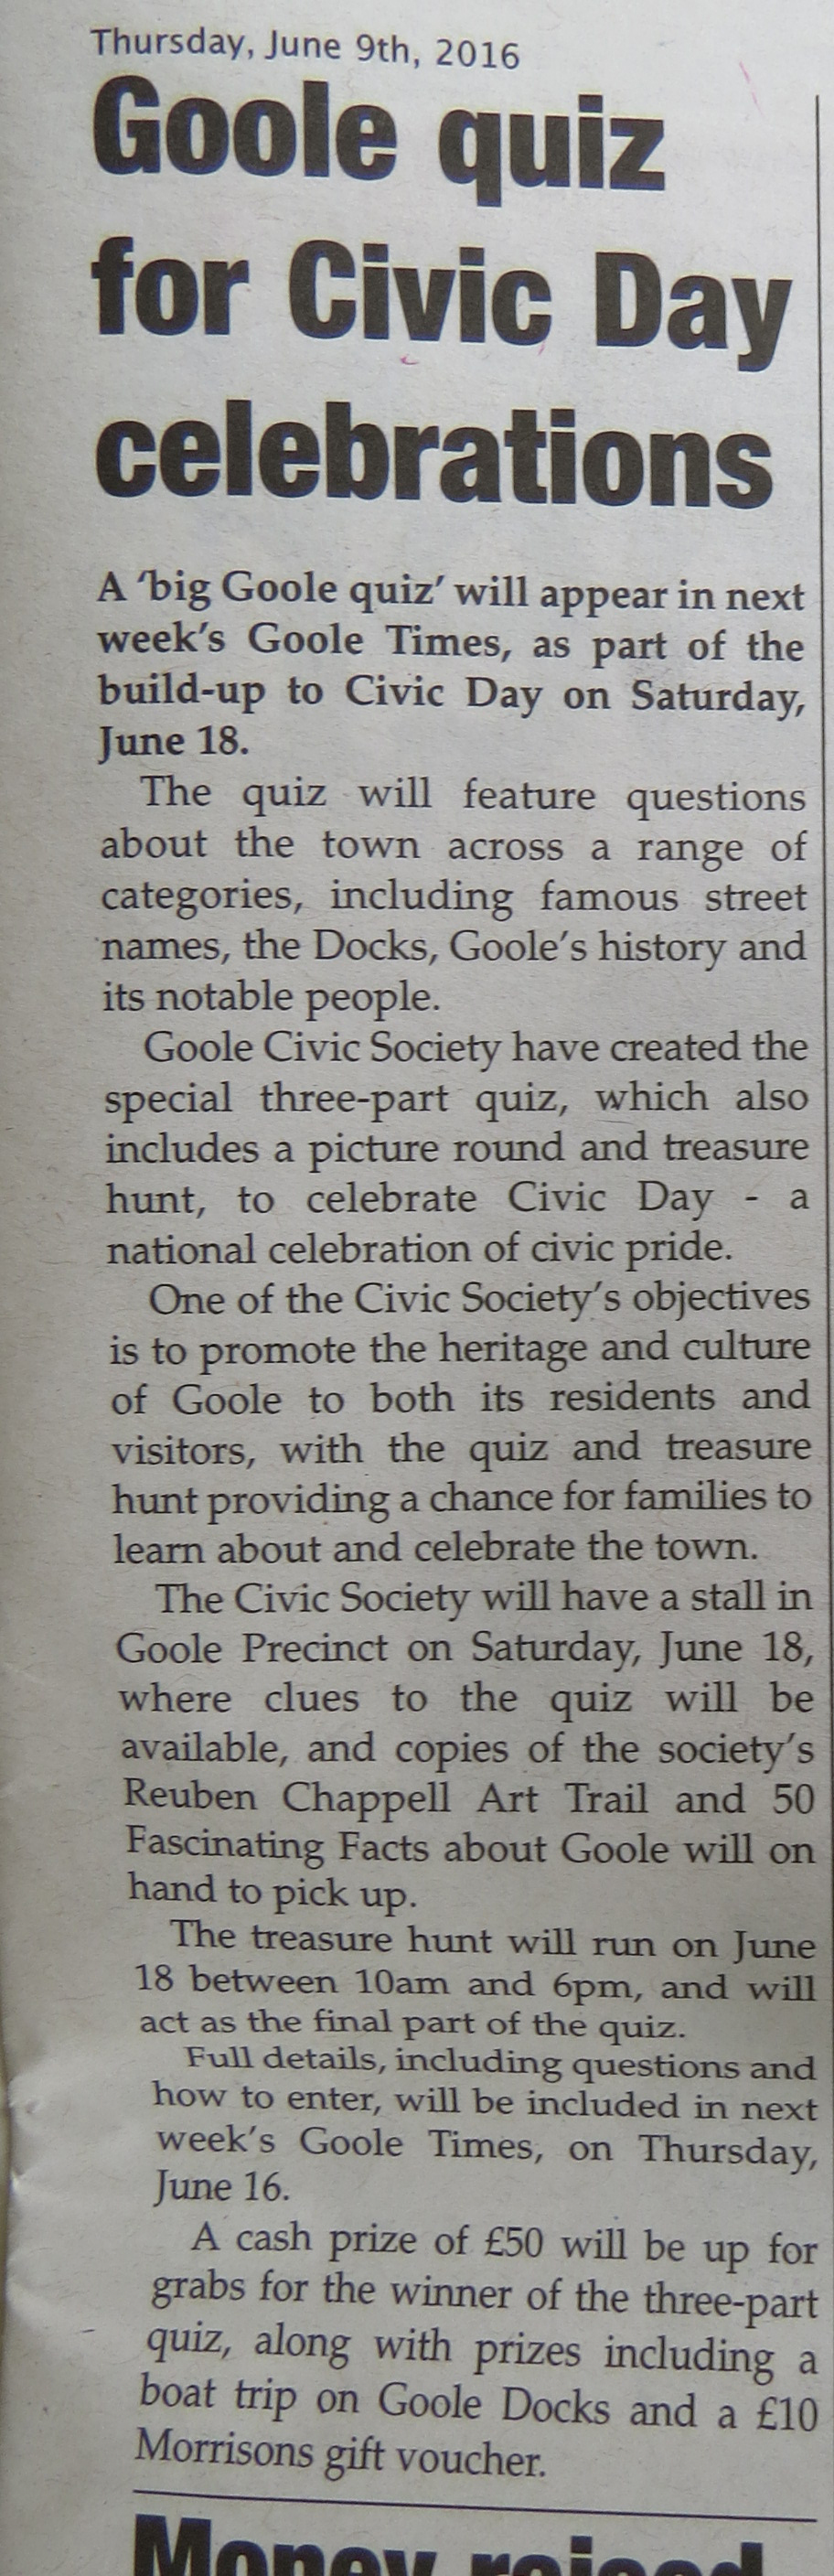 Goole Times preview of Big Goole Quiz for Civic Day 2016